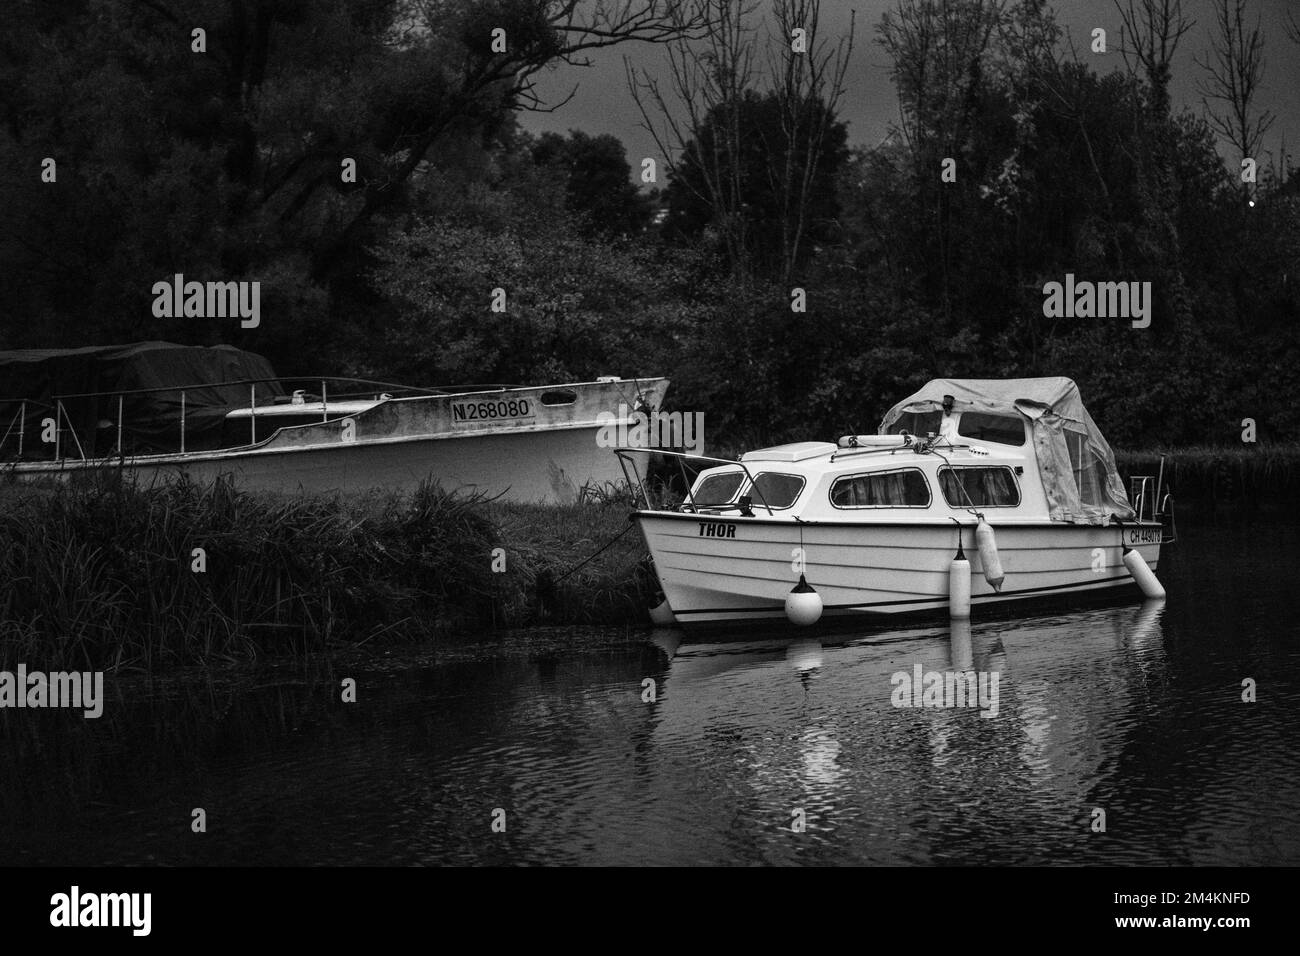 A monochrome shot of the boat on the lake with trees in the background Stock Photo